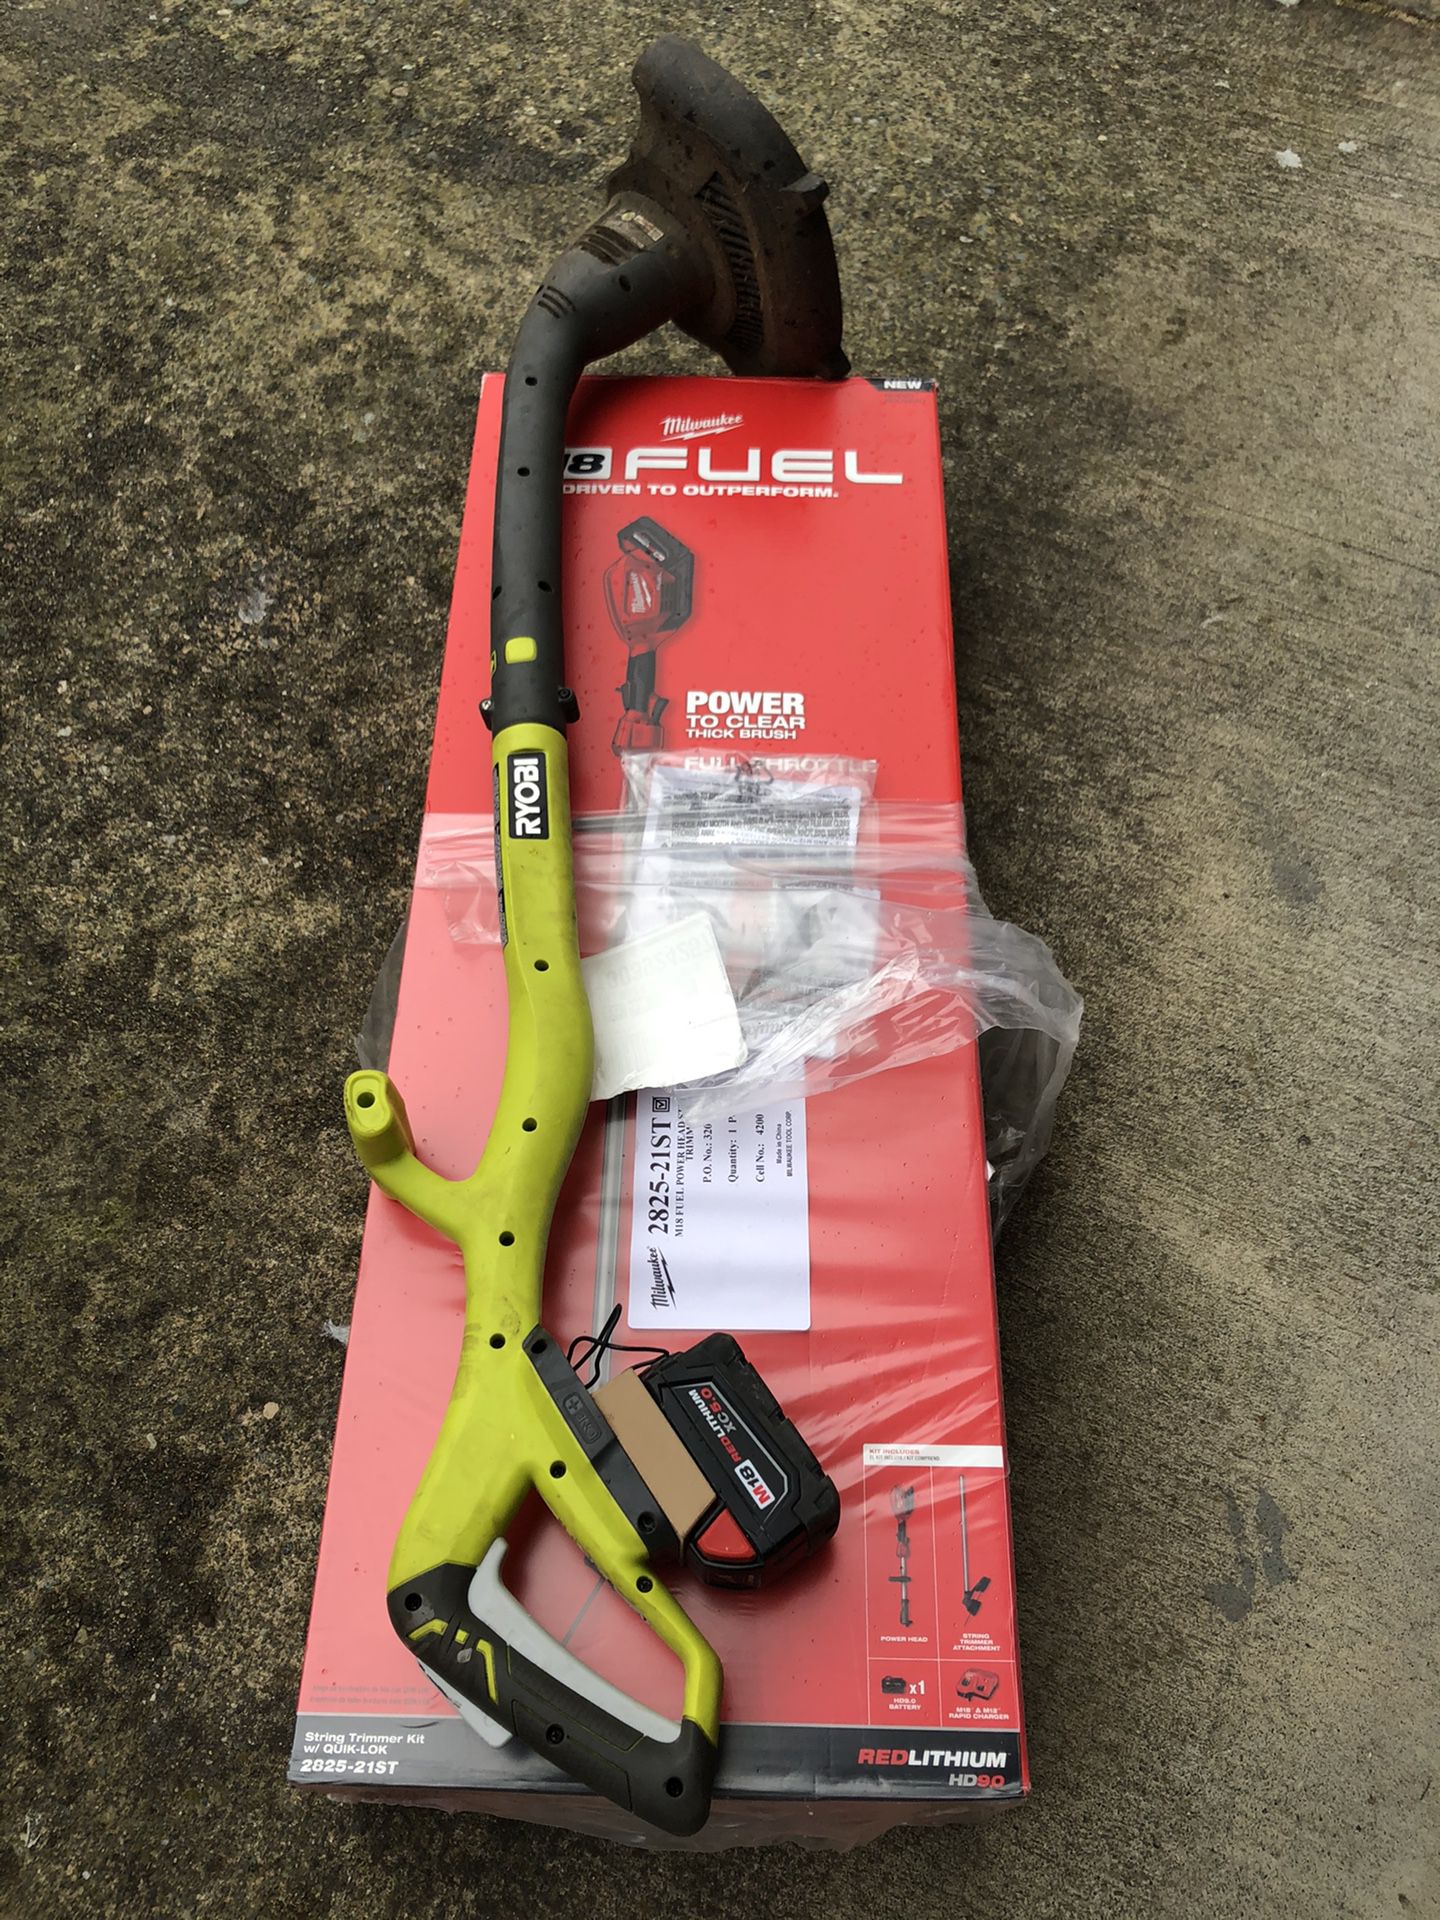 Ryobi milwaukee m18 powered weed wacker tool only trimmer adapter works great